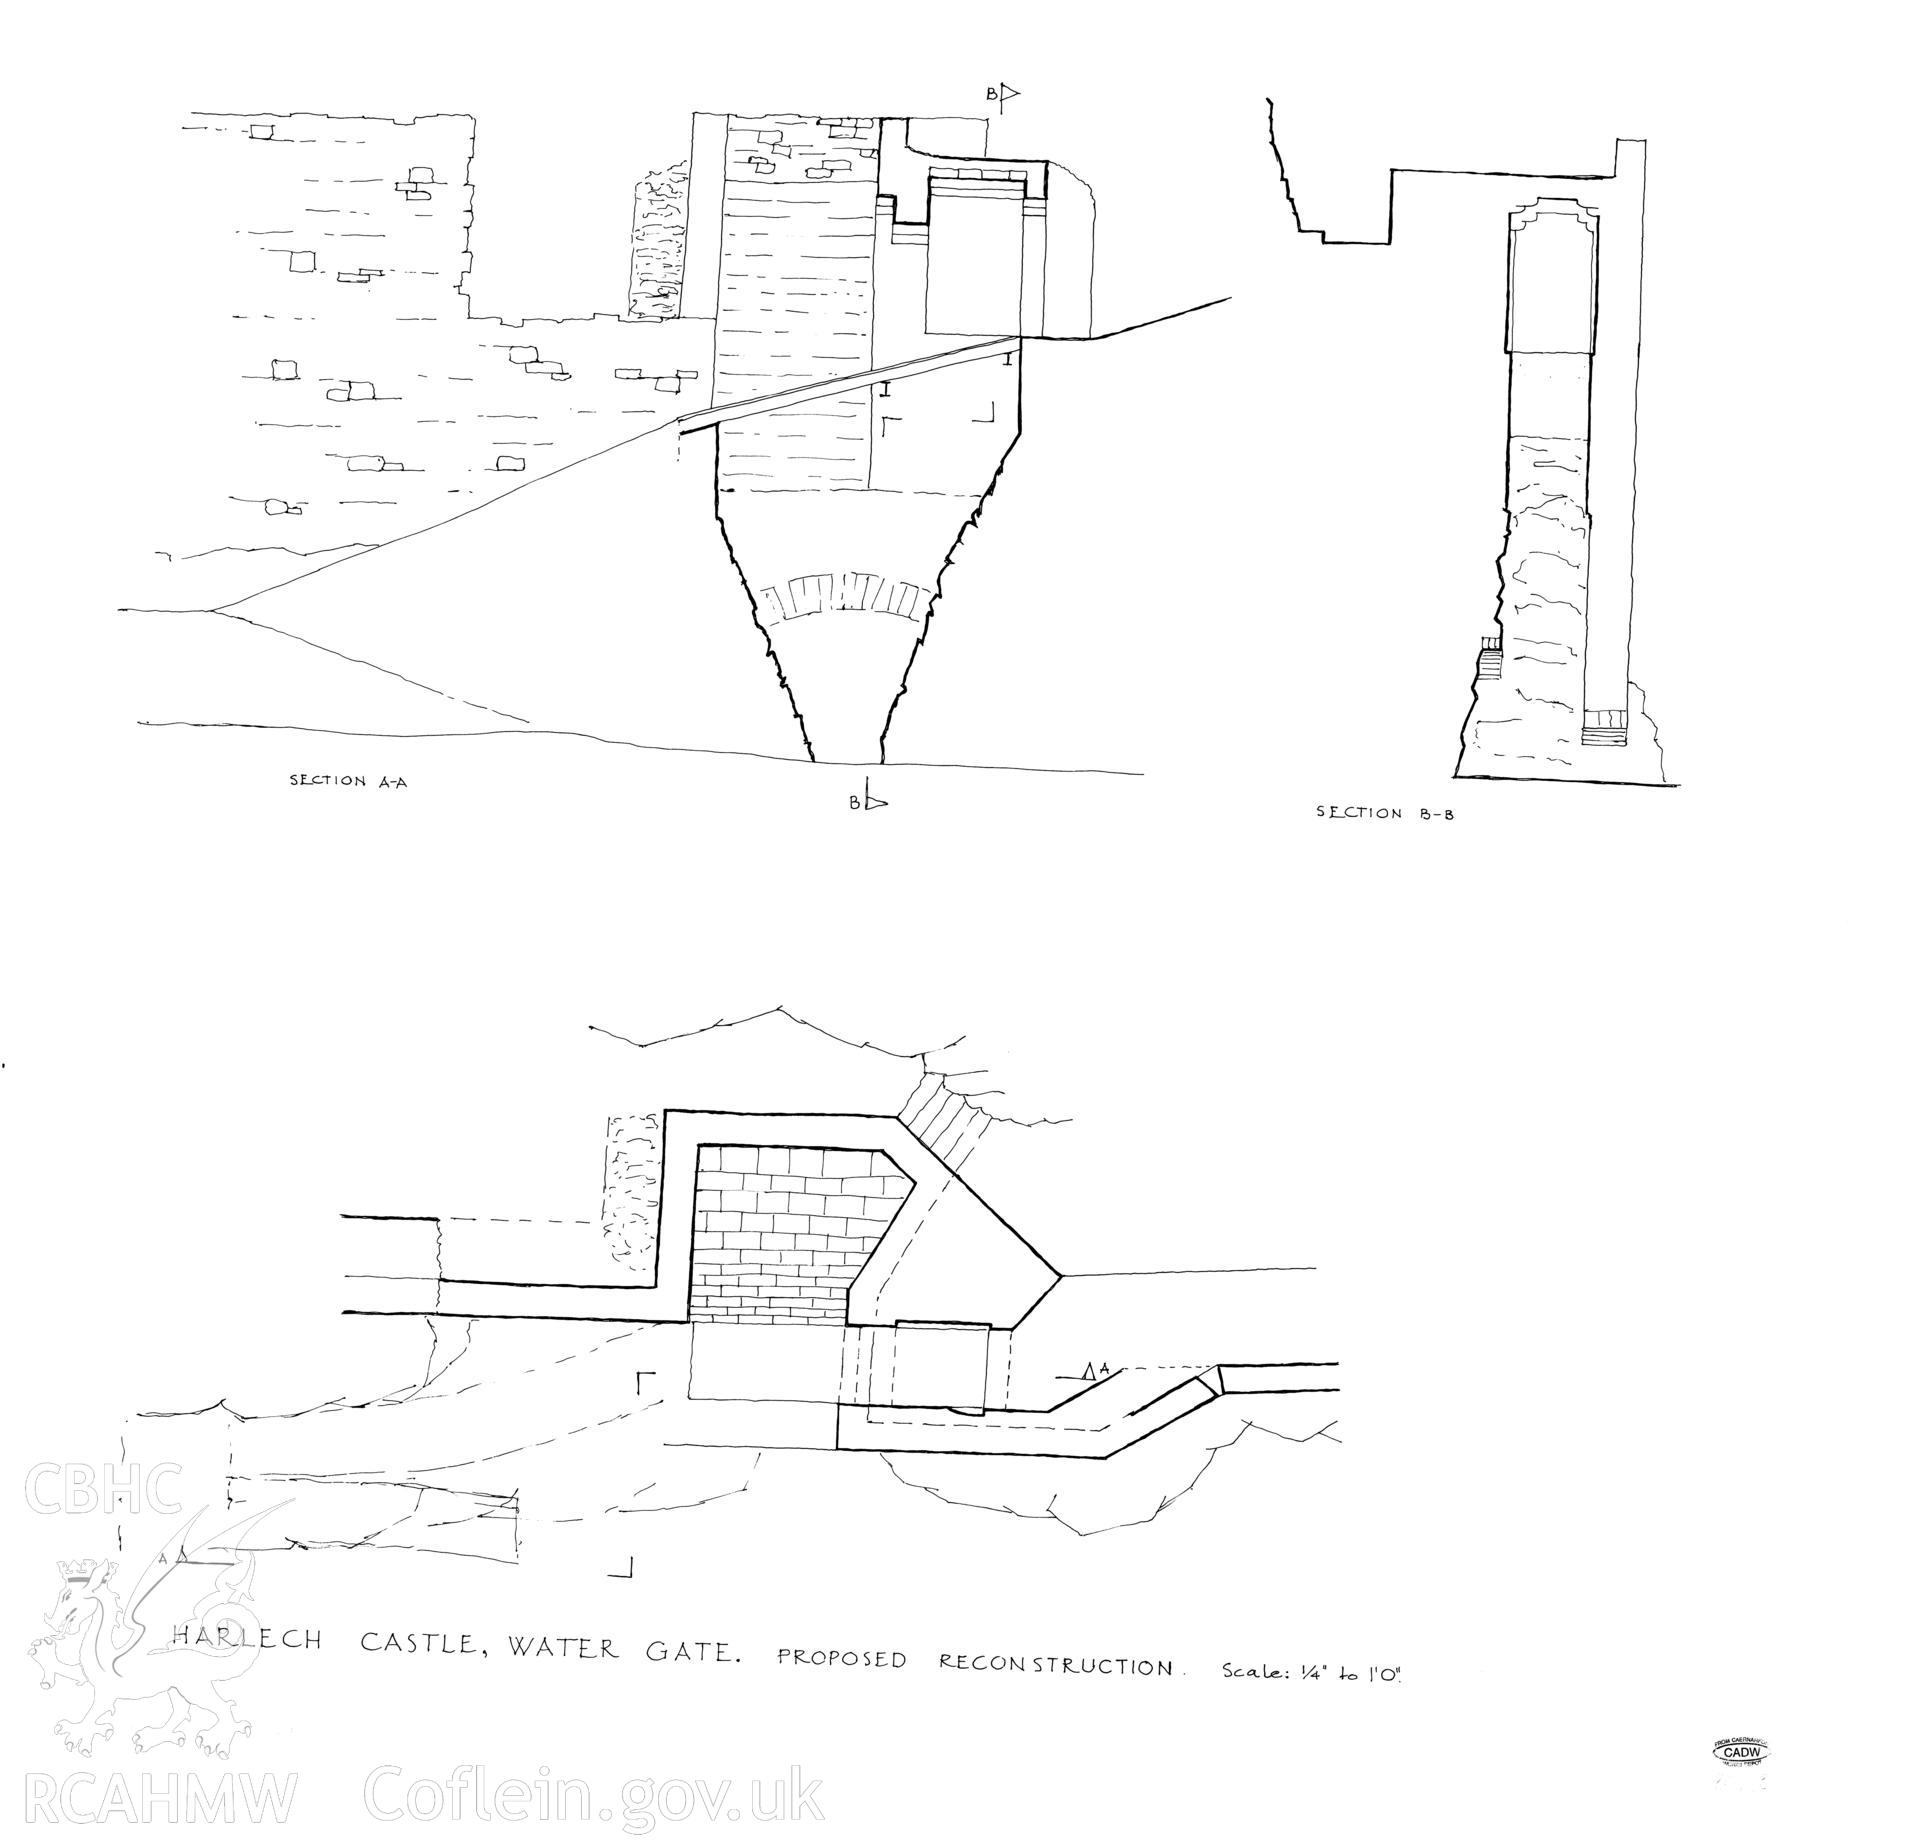 Cadw guardianship monument drawing of Harlech Castle. Watergate, plan + 2 sections. Cadw Ref. No:86//88. Scale 1:48.